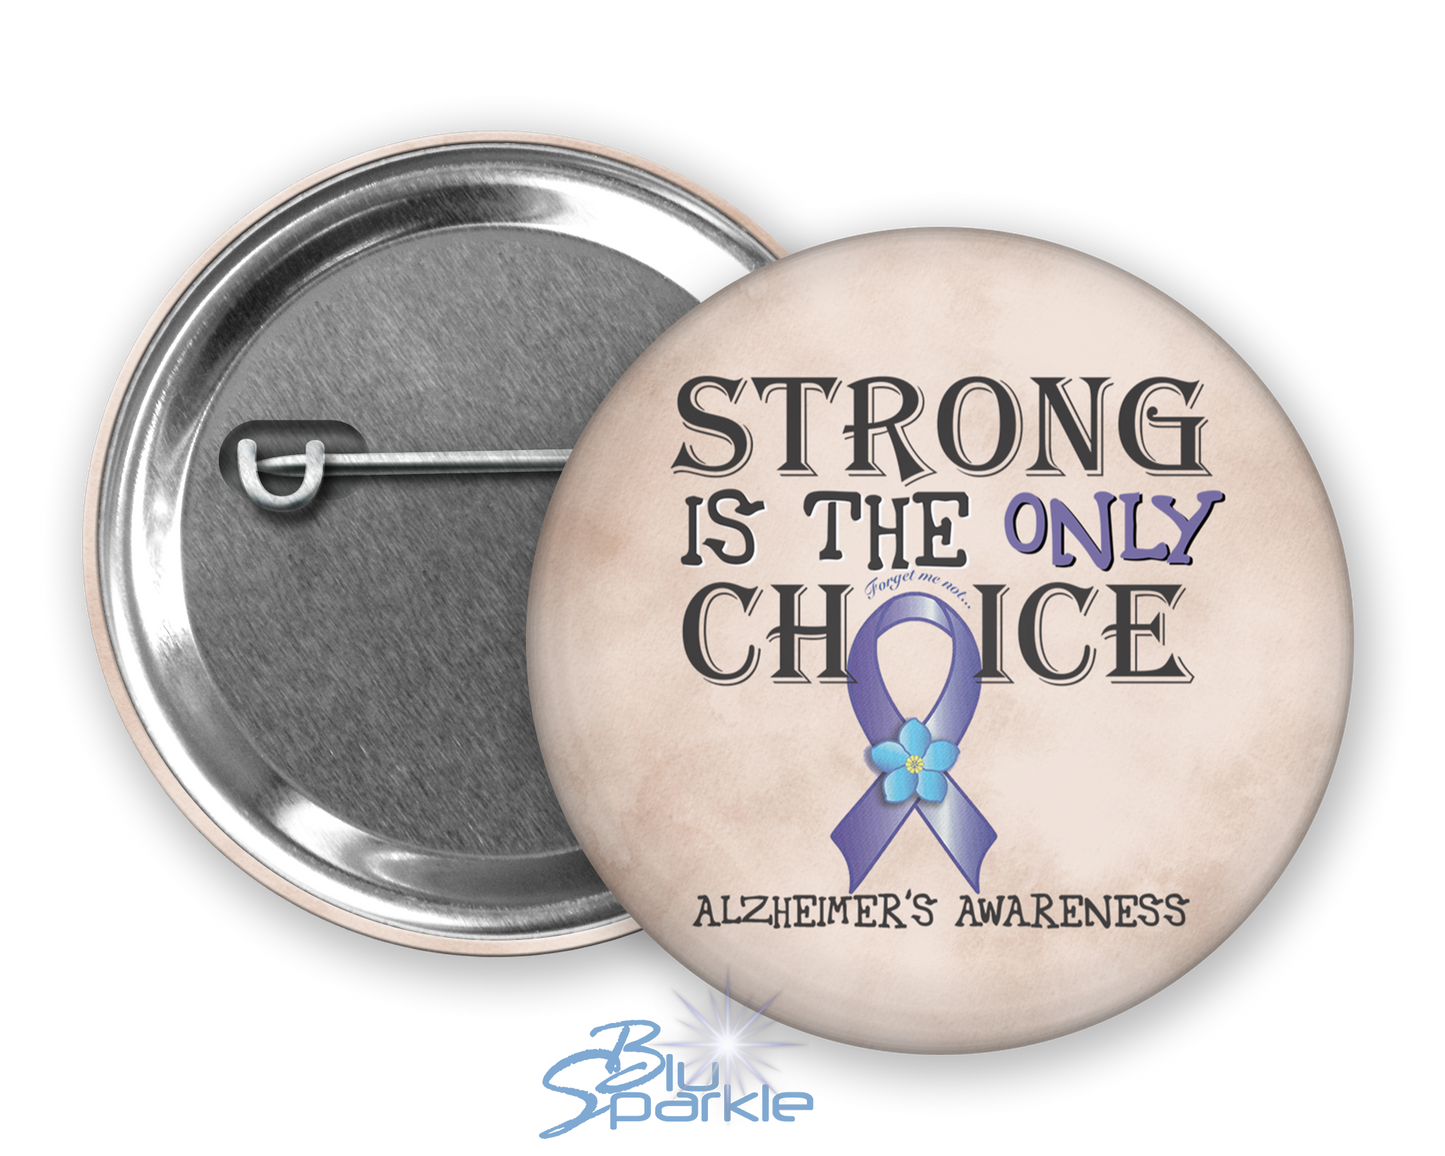 Strong is the Only Choice -Alzheimer's Awareness Pinback Button |x|